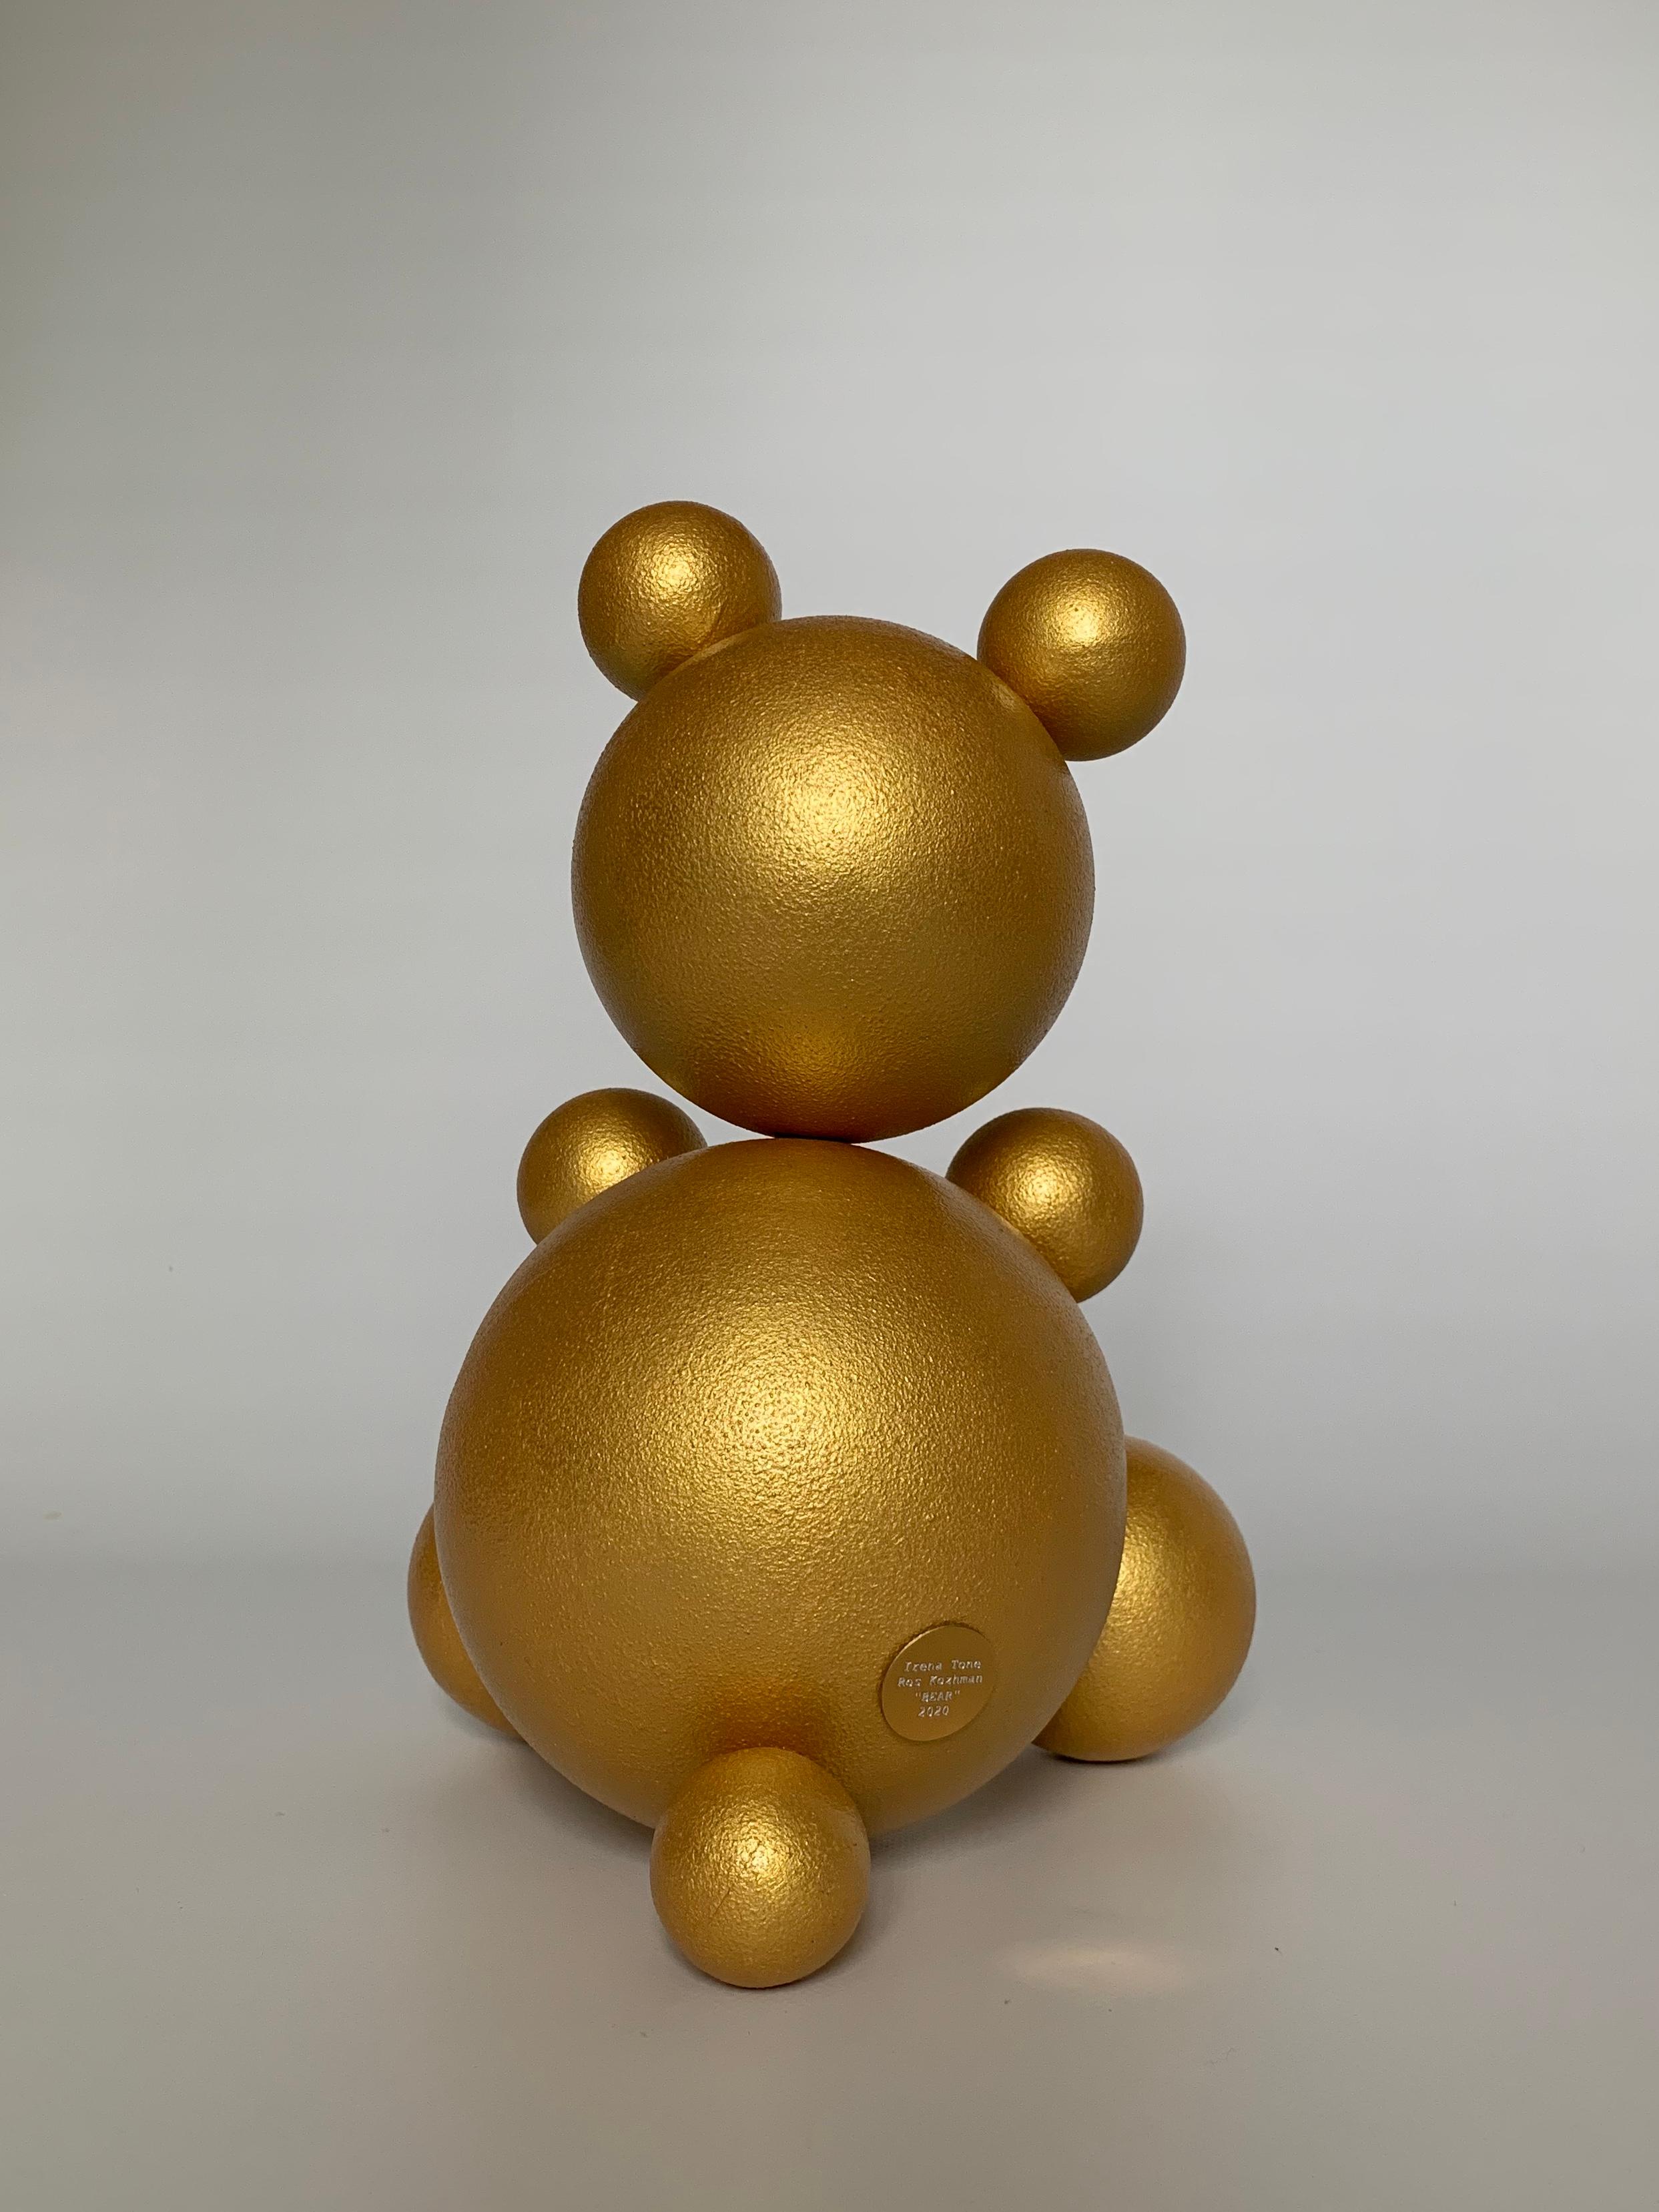 Made in Ukraine, 2020.


Art is the best gift, isn't it?
Do you like bears? Look at these tiny ears and tails! And look at their colorful fur... Aren't they sweet candy? A metal bear covered by acrylic is a sample of minimal contemporary sculpture.